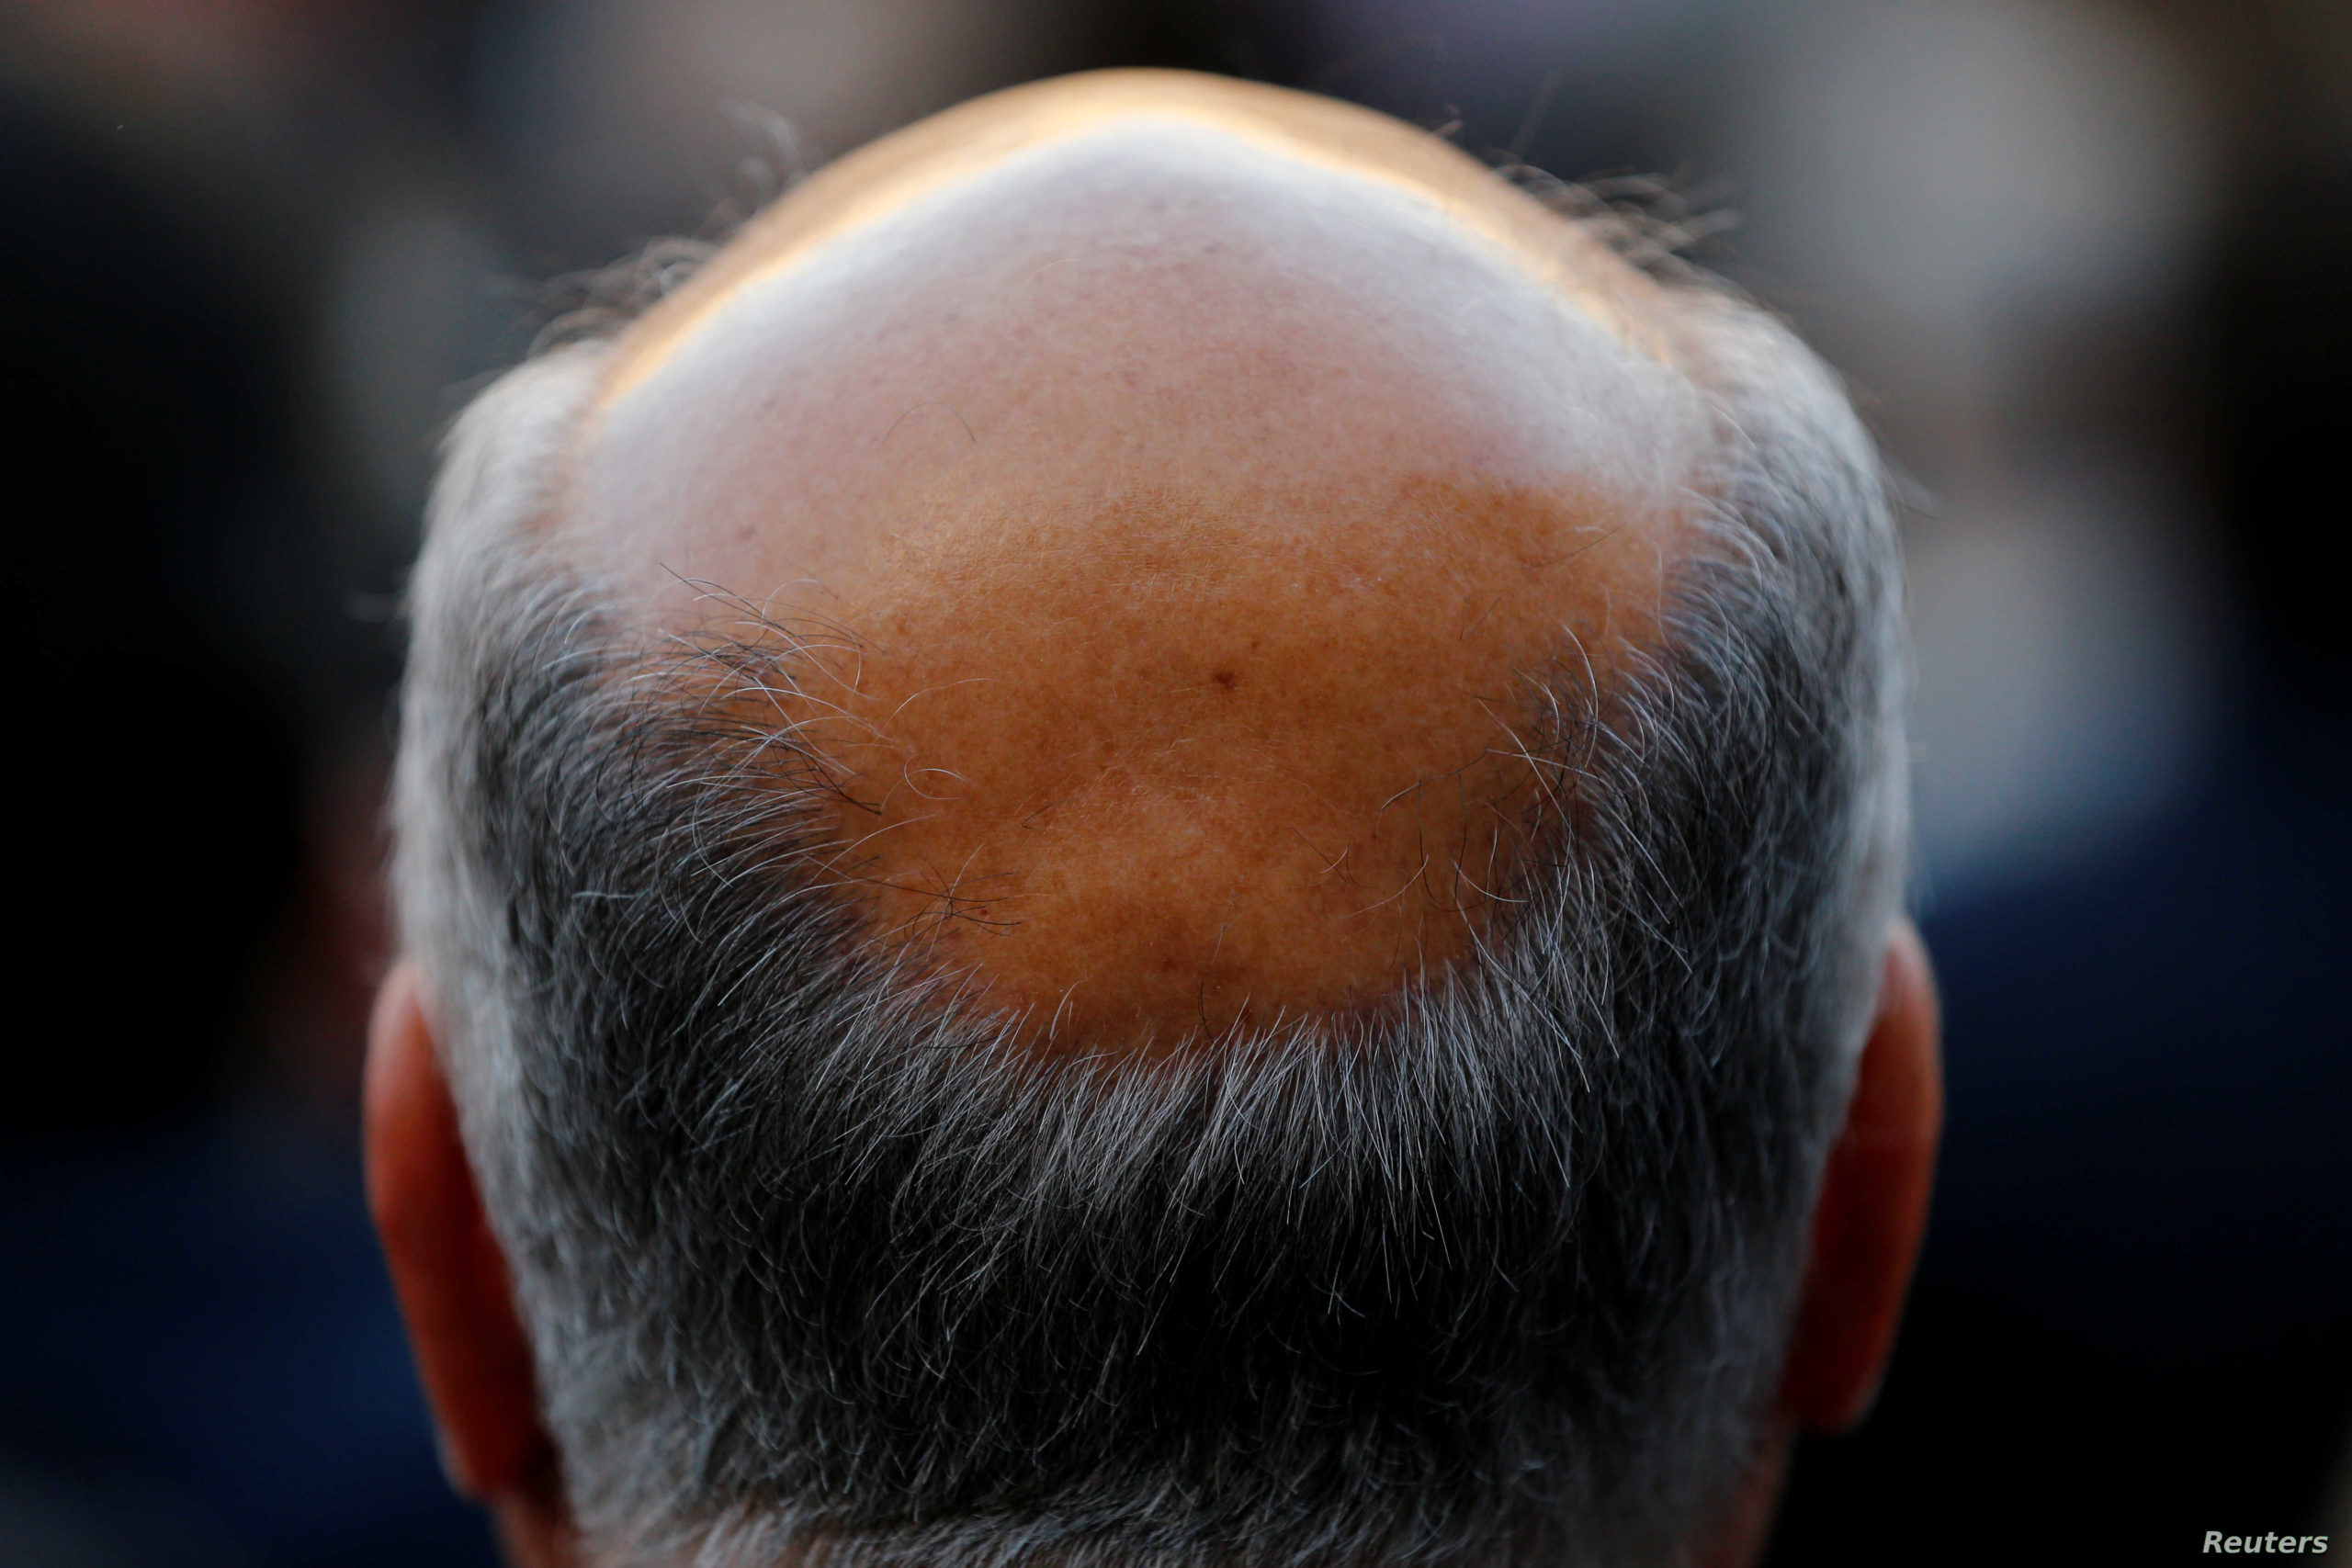 man with baldness